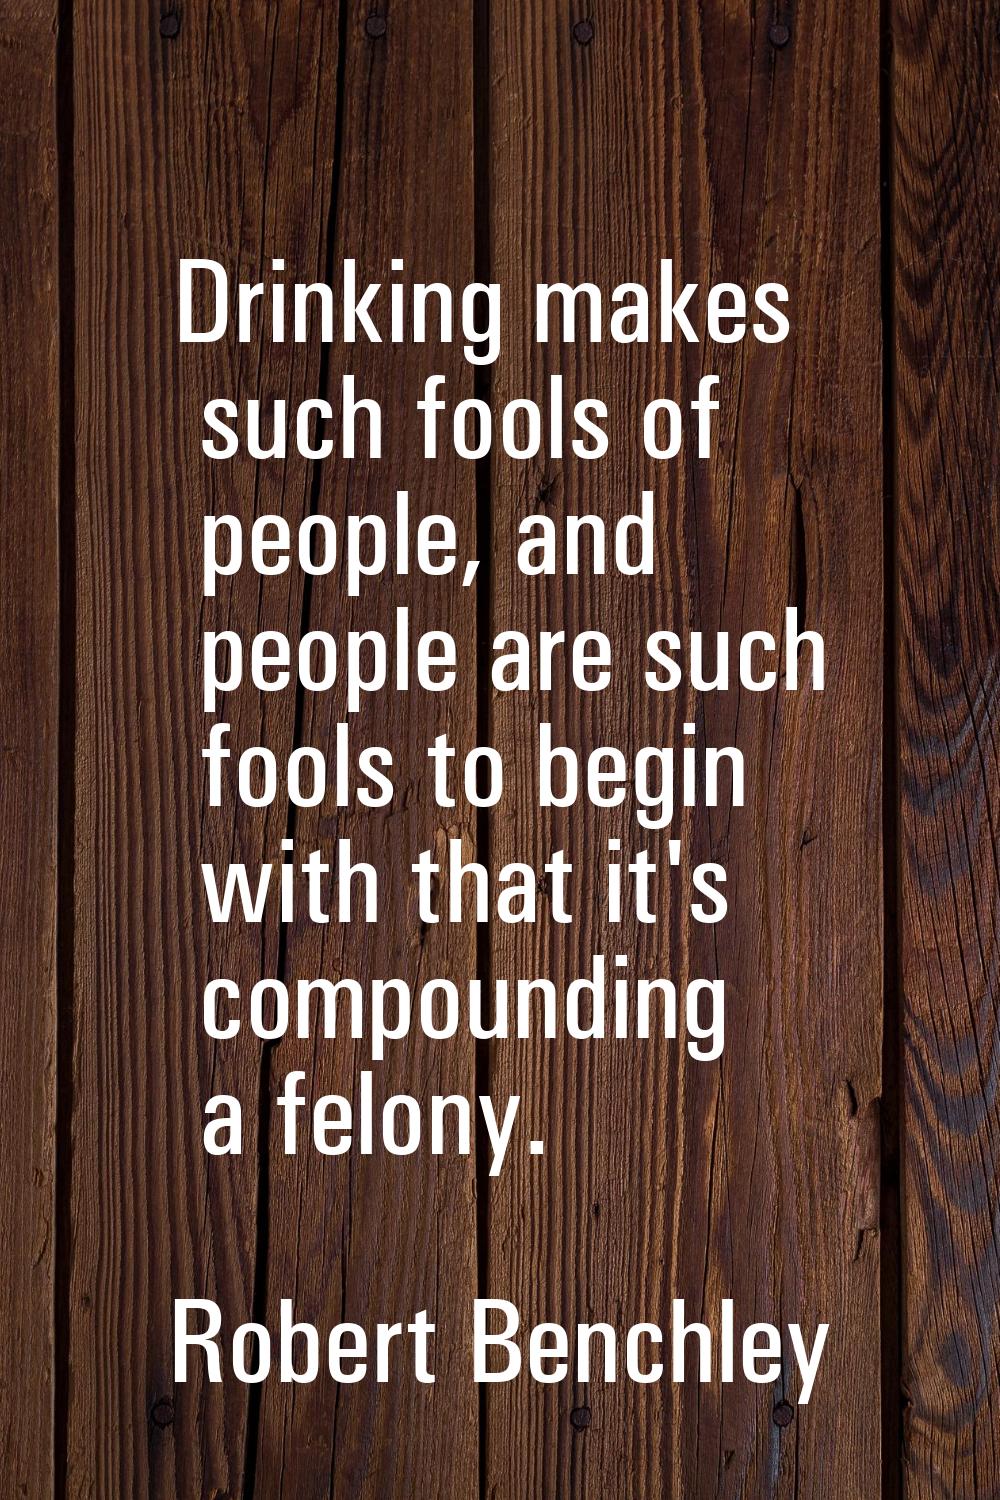 Drinking makes such fools of people, and people are such fools to begin with that it's compounding 